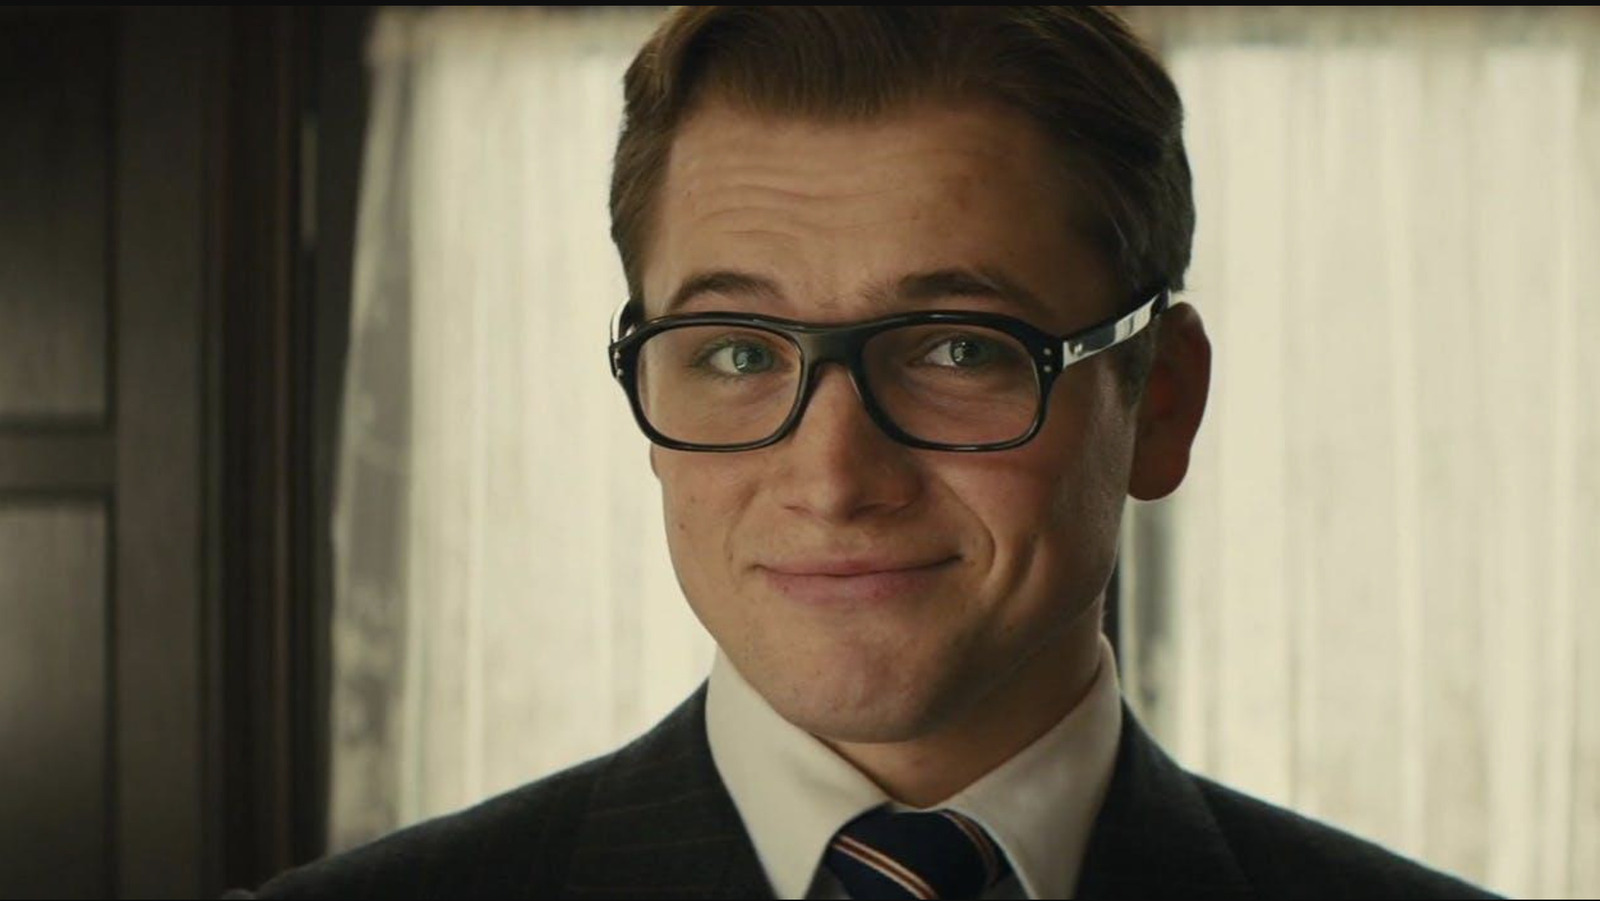 Carry On: Everything We Know About Jaume Collet-Serra's Taron Egerton-Led Netflix Thriller